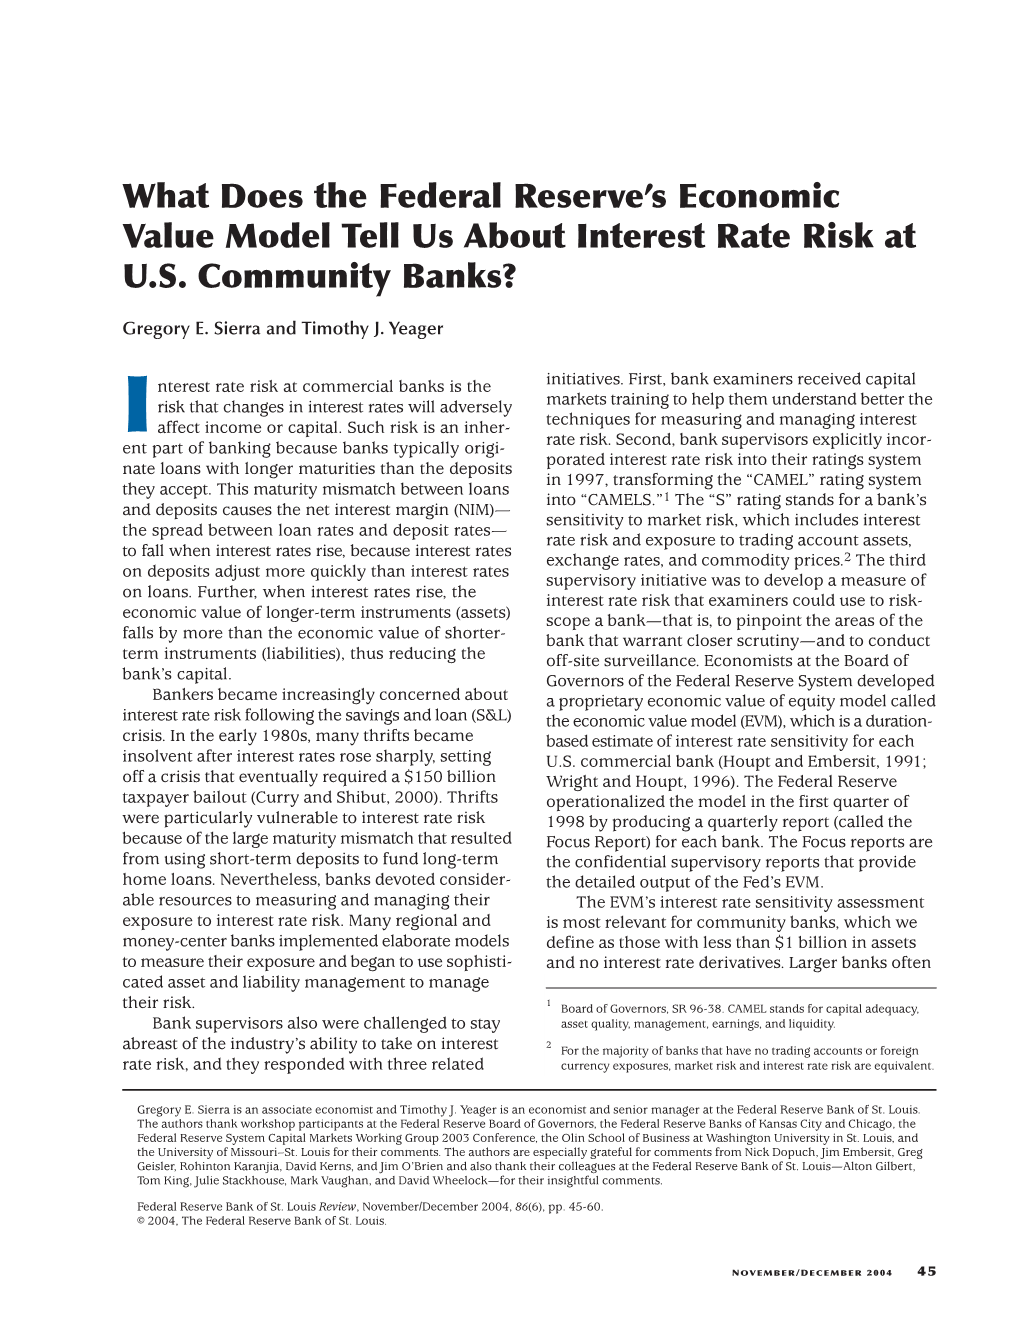 What Does the Federal Reserve's Economic Value Model Tell Us